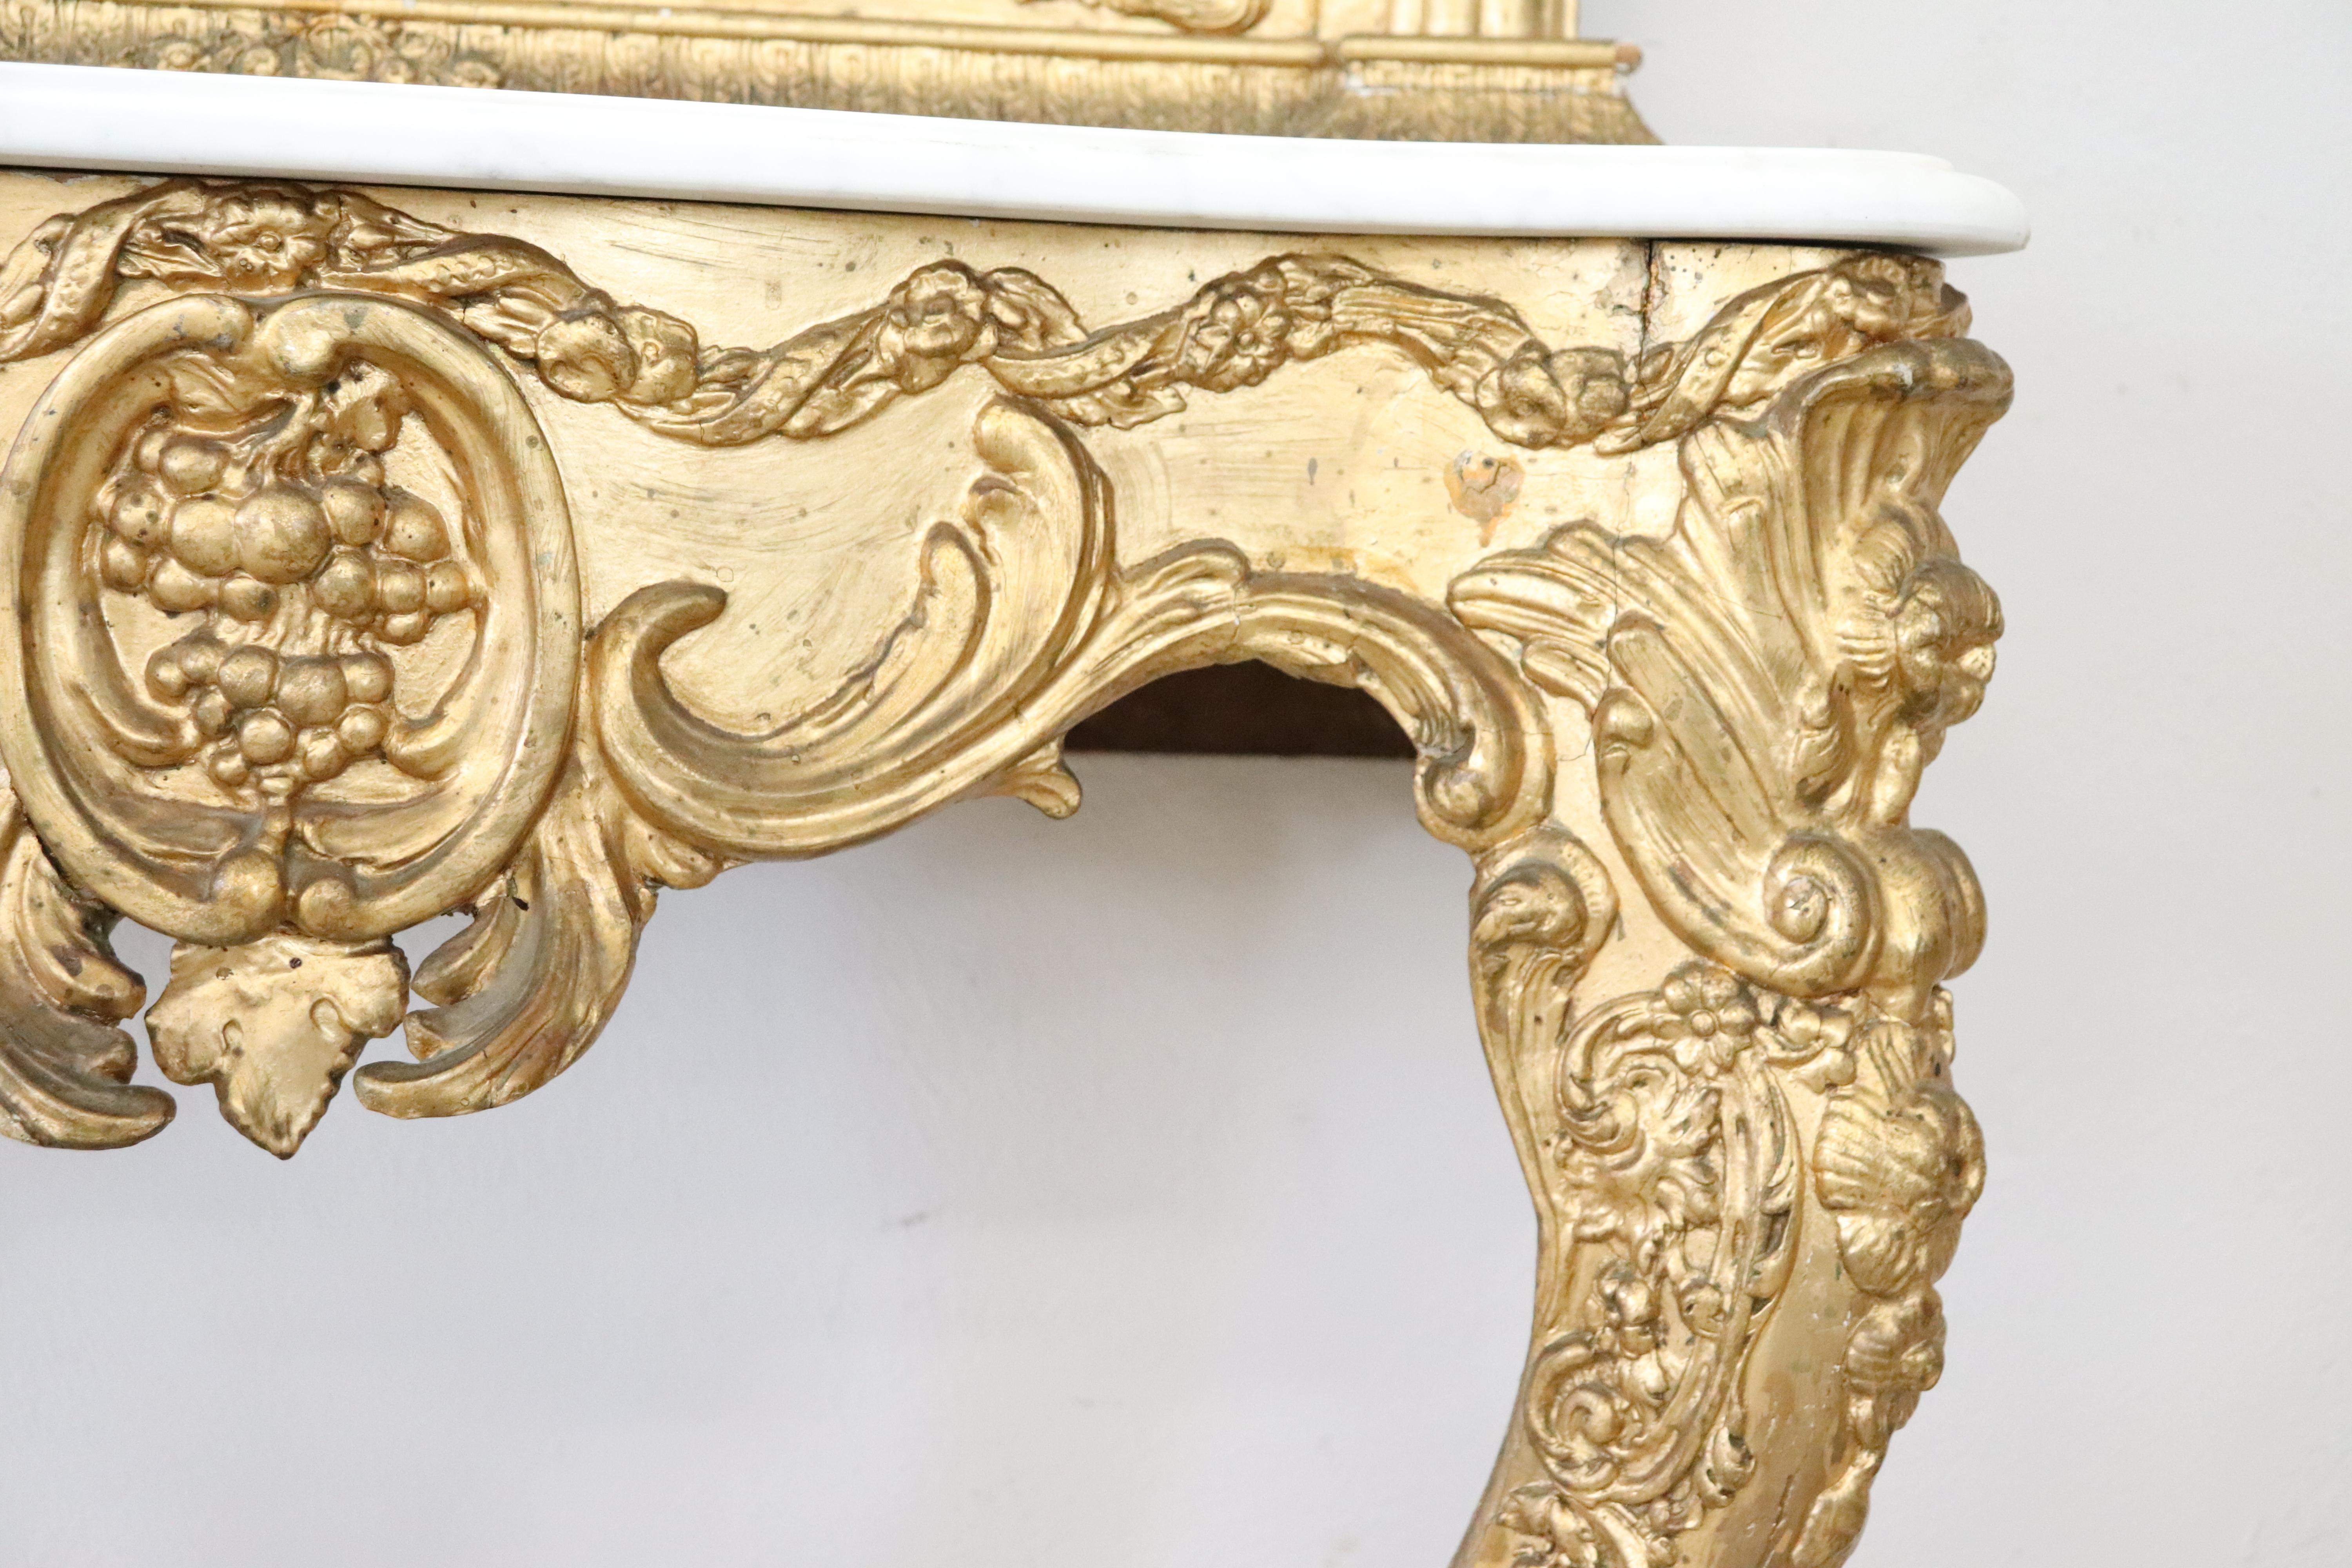 Late 19th Century 19th Century Italian Carved and Gilded Wood Luxury Console Table with Mirror